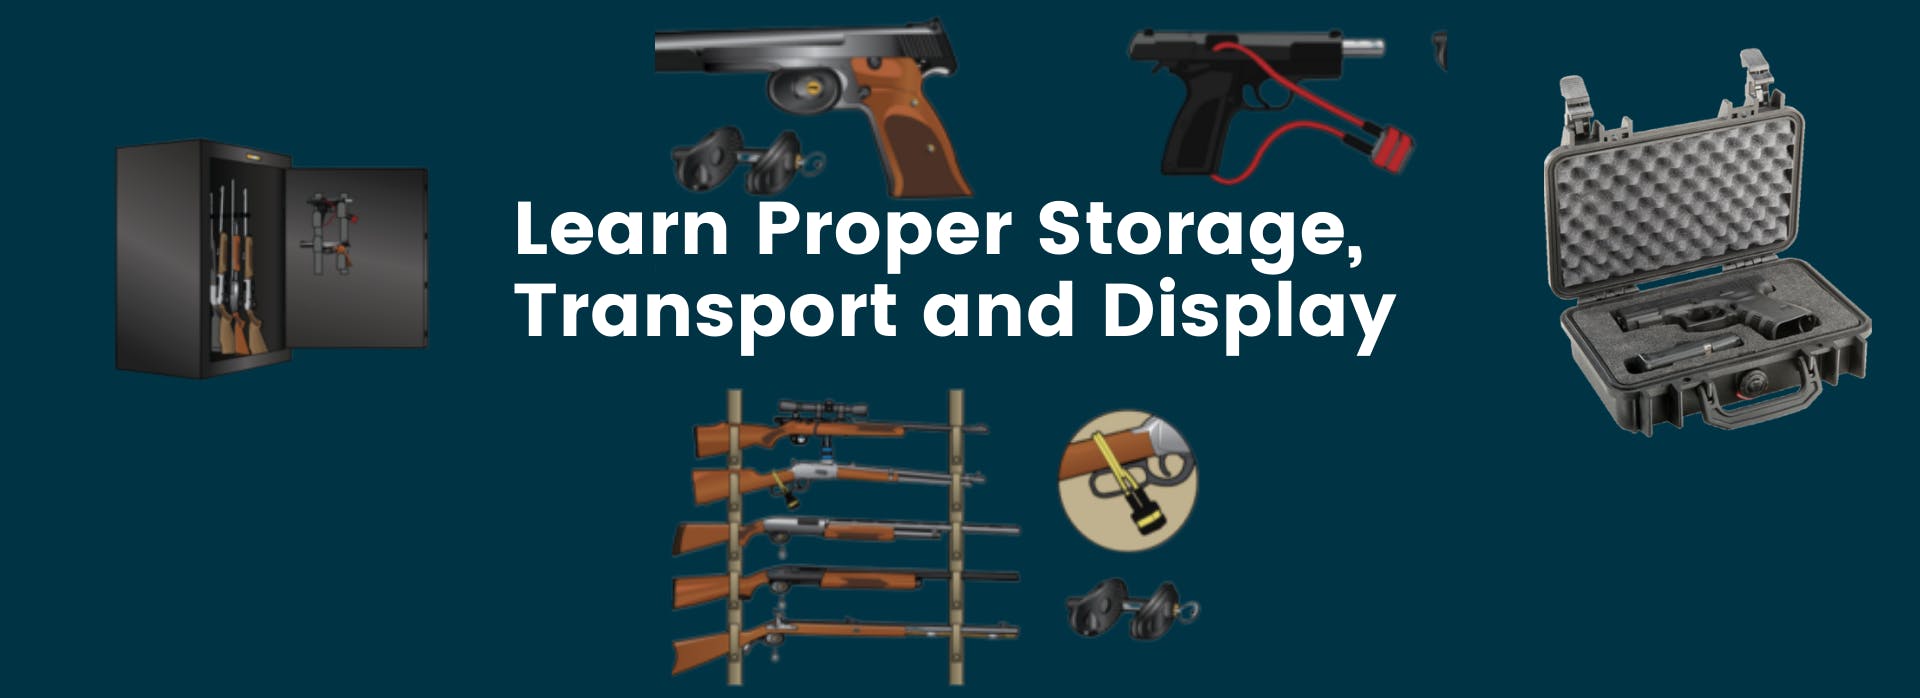 Learn proper storage transport and display